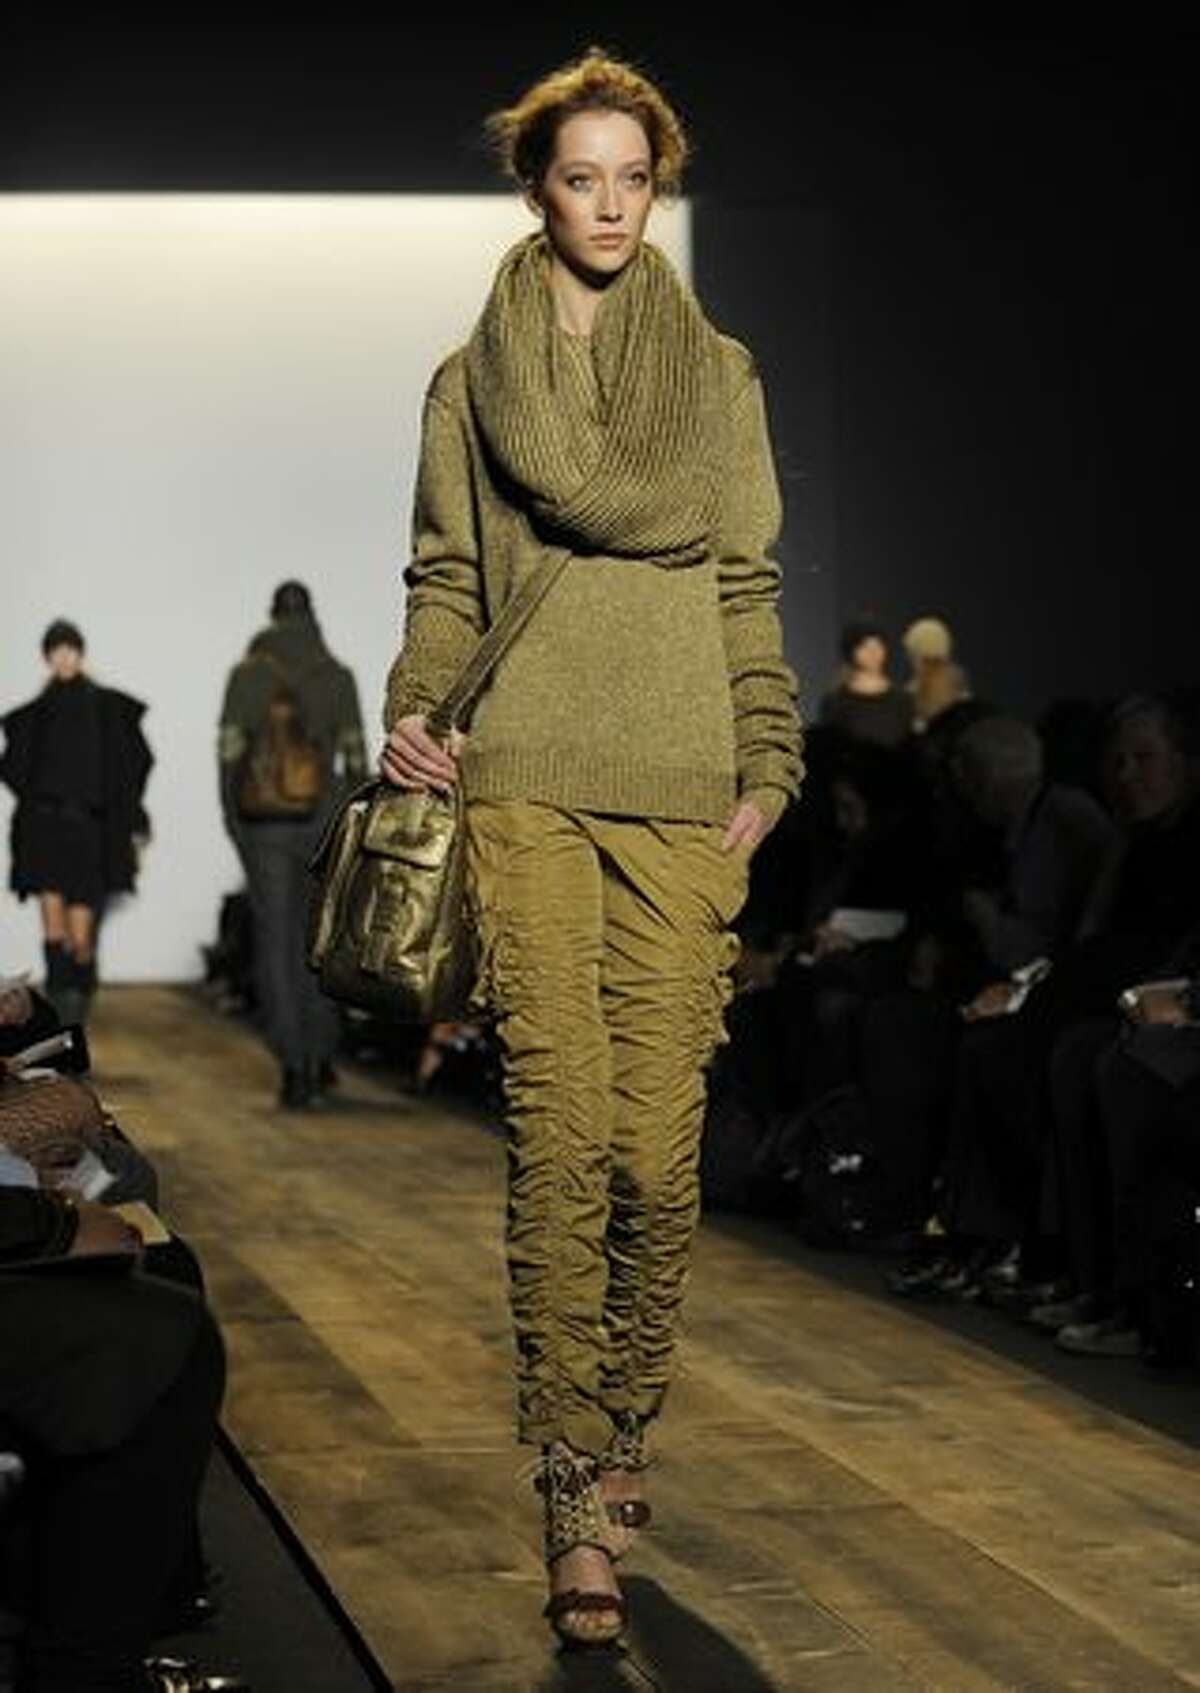 A model displays a creation by Michael Kors.